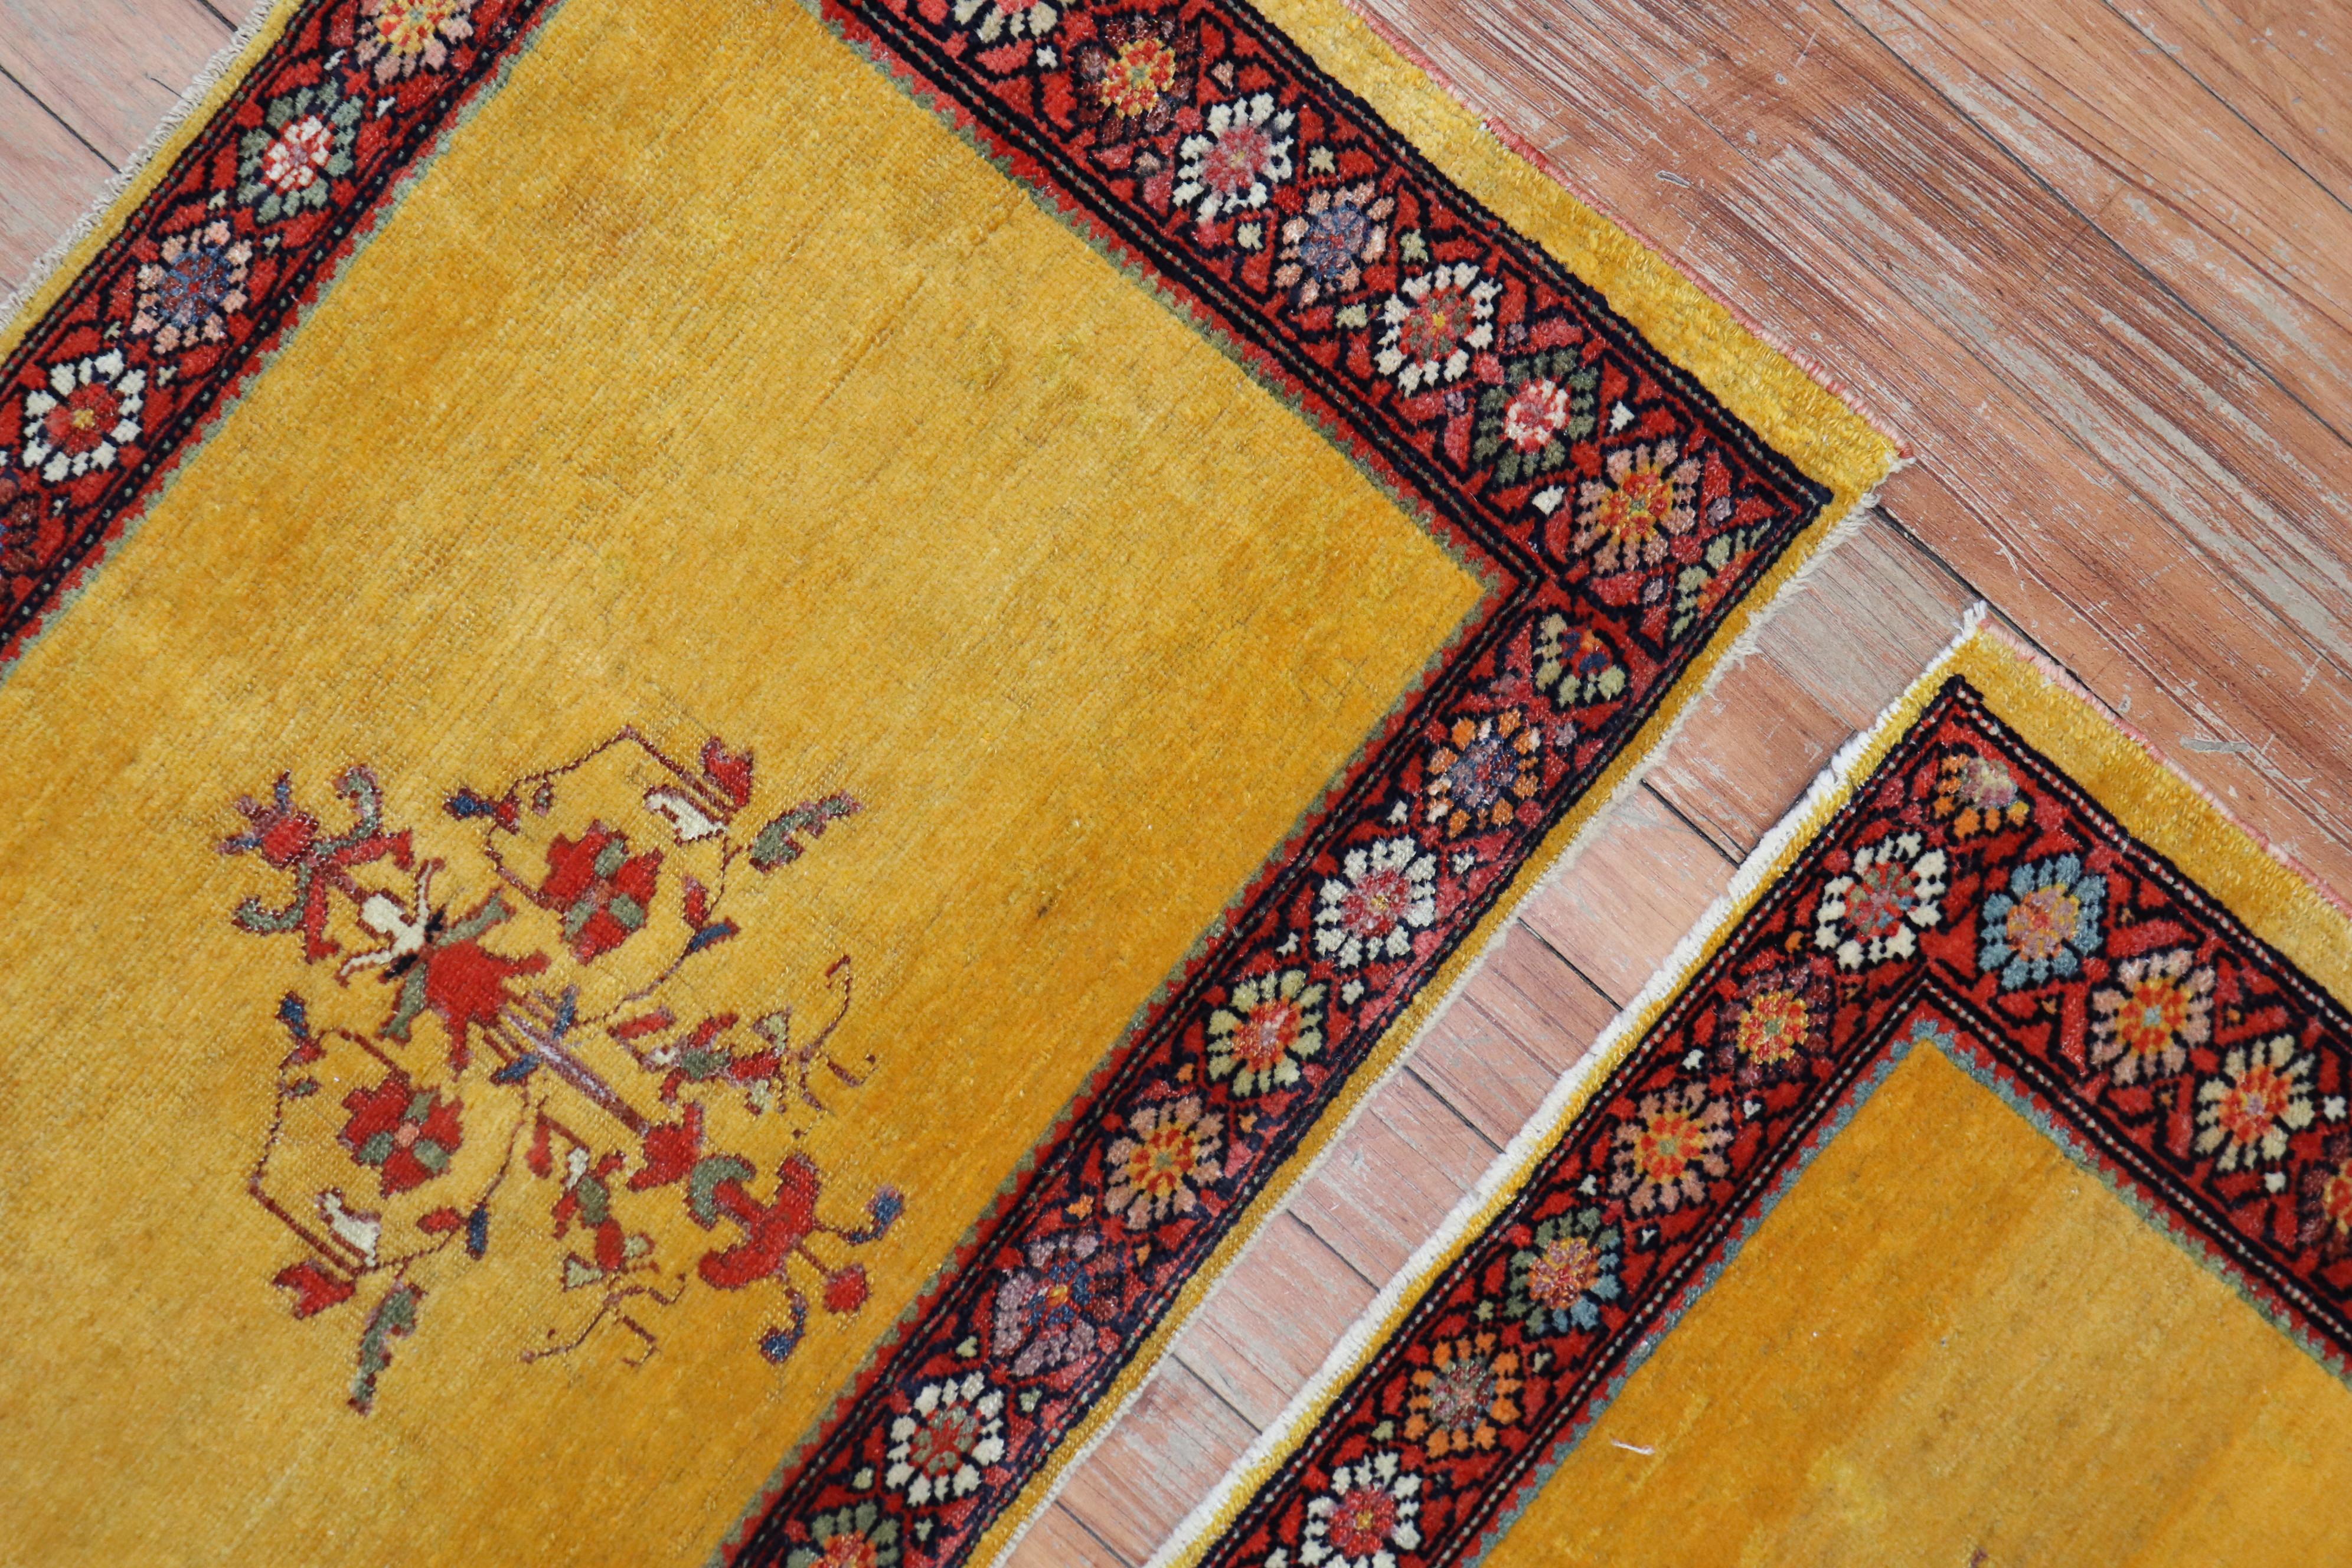 Hand-Woven Whimsical Pair of Yellow Persian Ferehan Mats For Sale